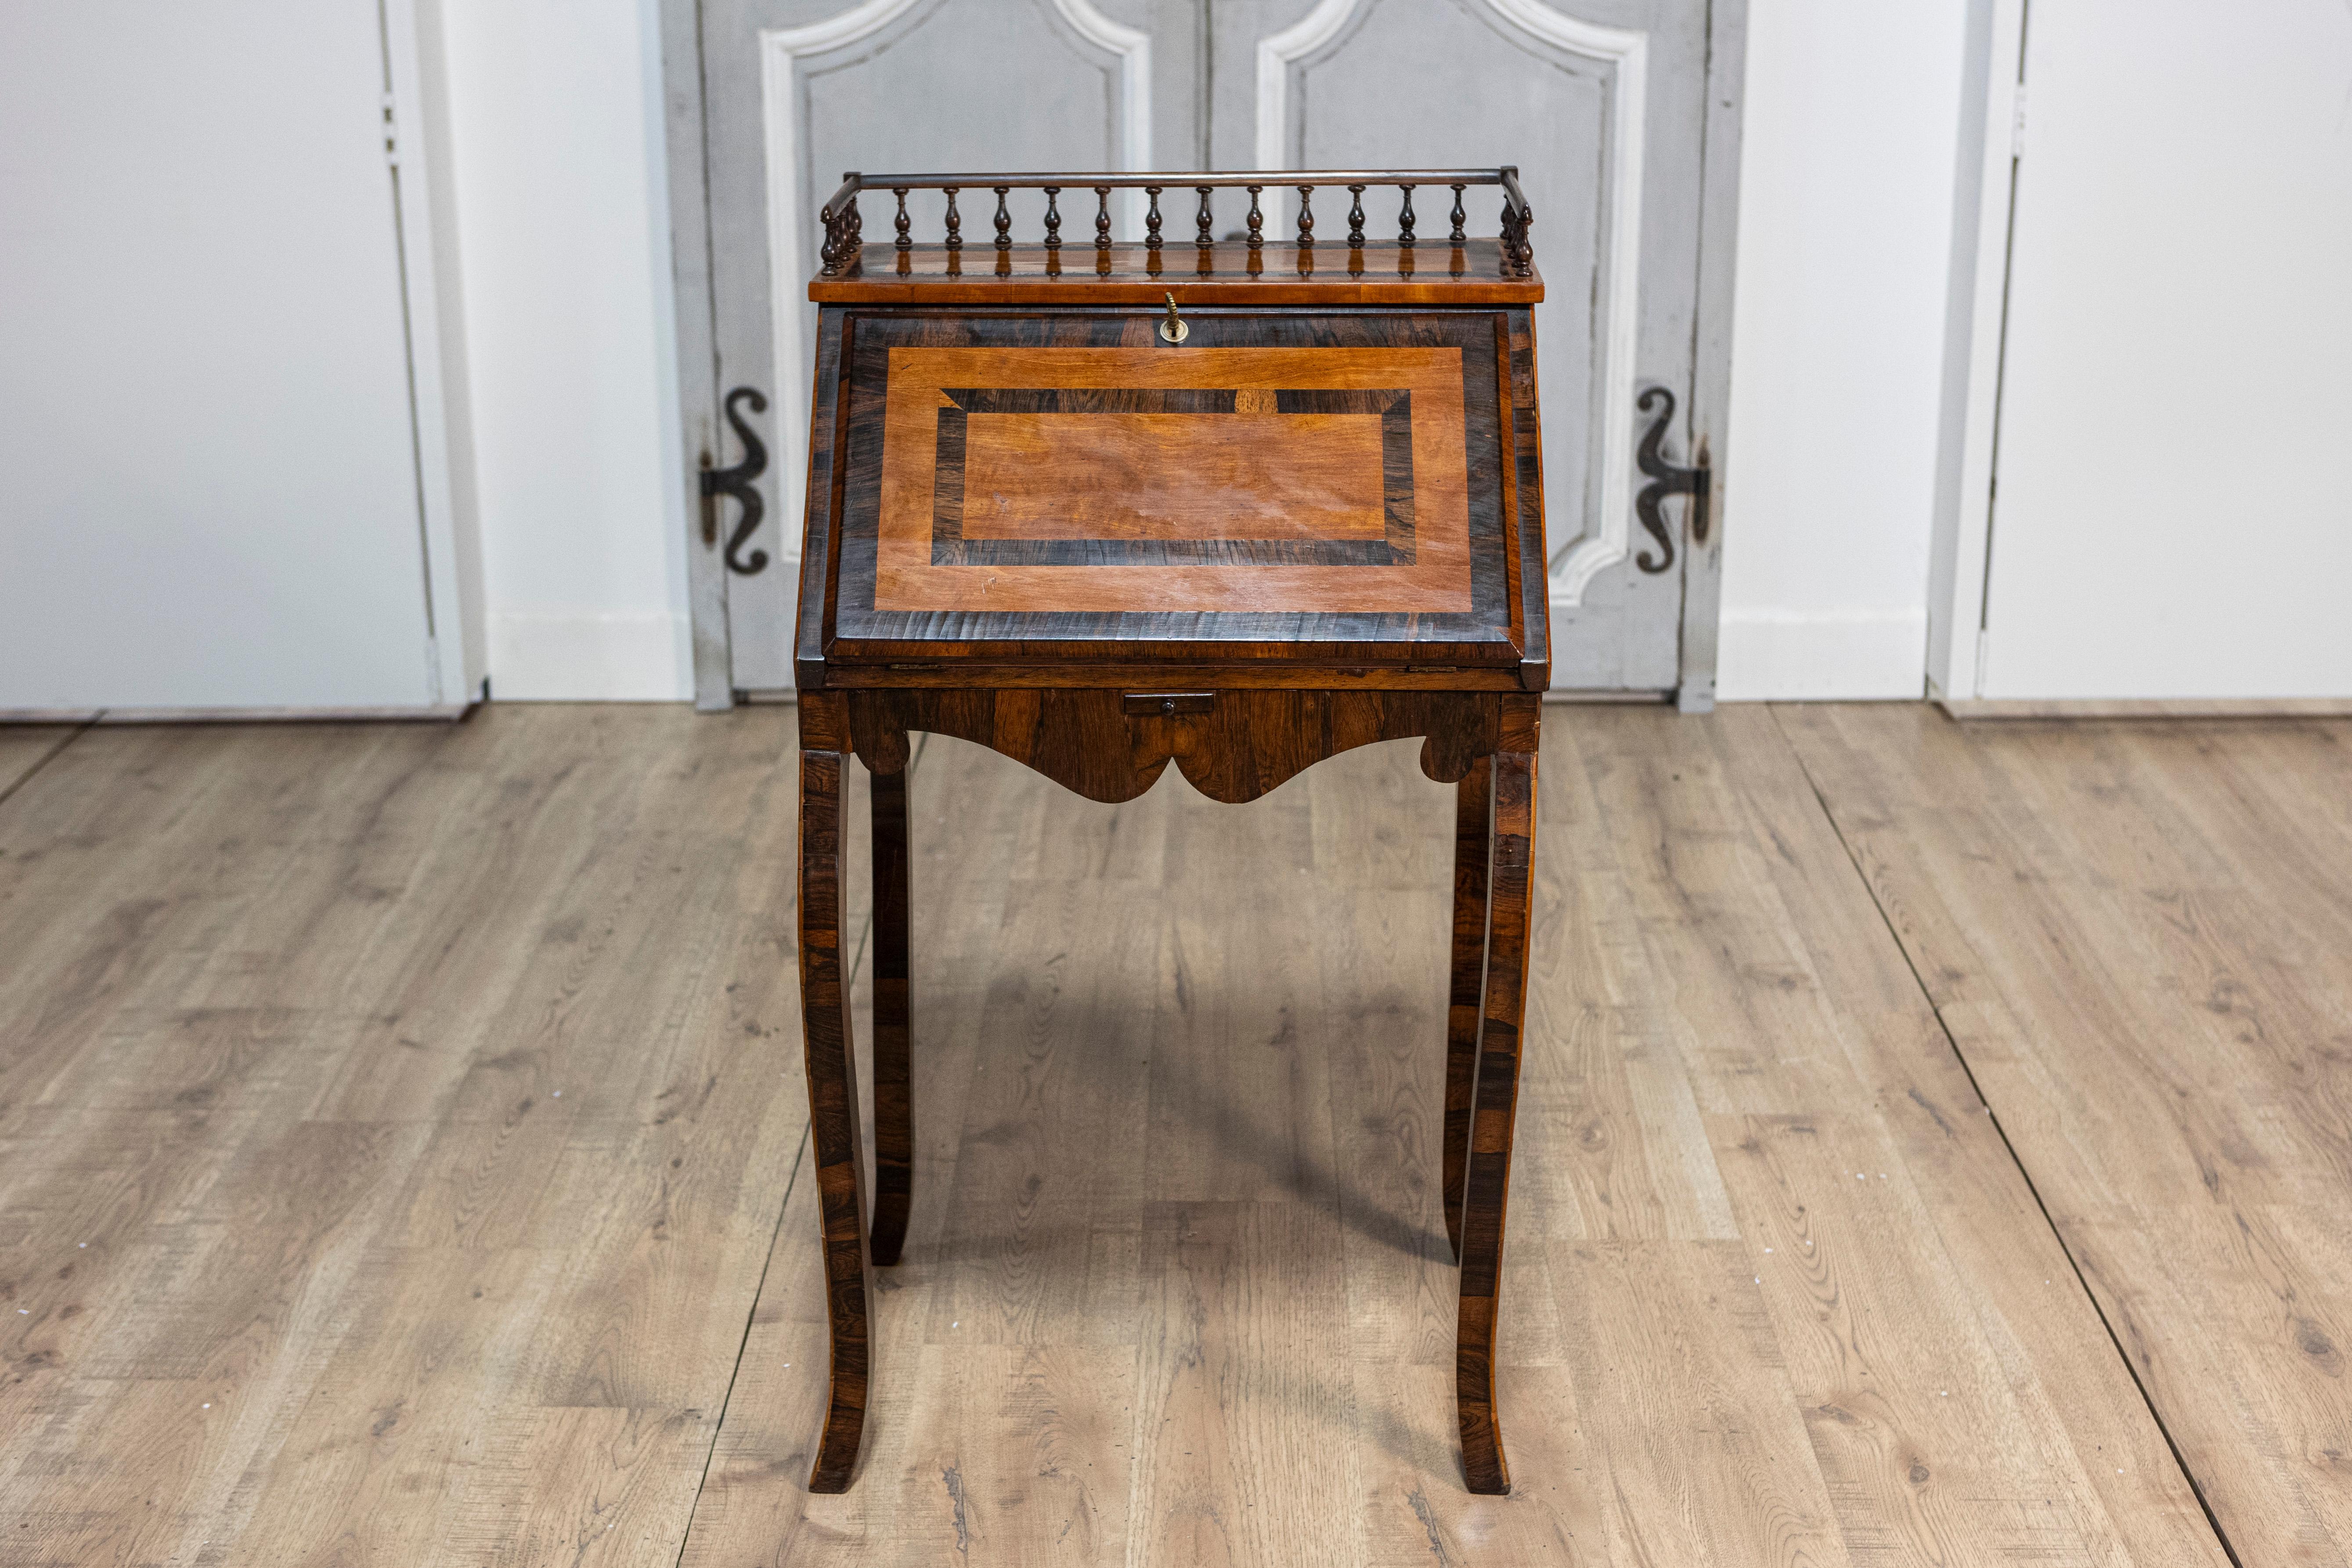 A petite Italian two-toned walnut and mahogany writing desk from the 19th century with slant front, turned three-quarter gallery and carved apron. This petite Italian two-toned walnut and mahogany writing desk from the 19th century is a charming